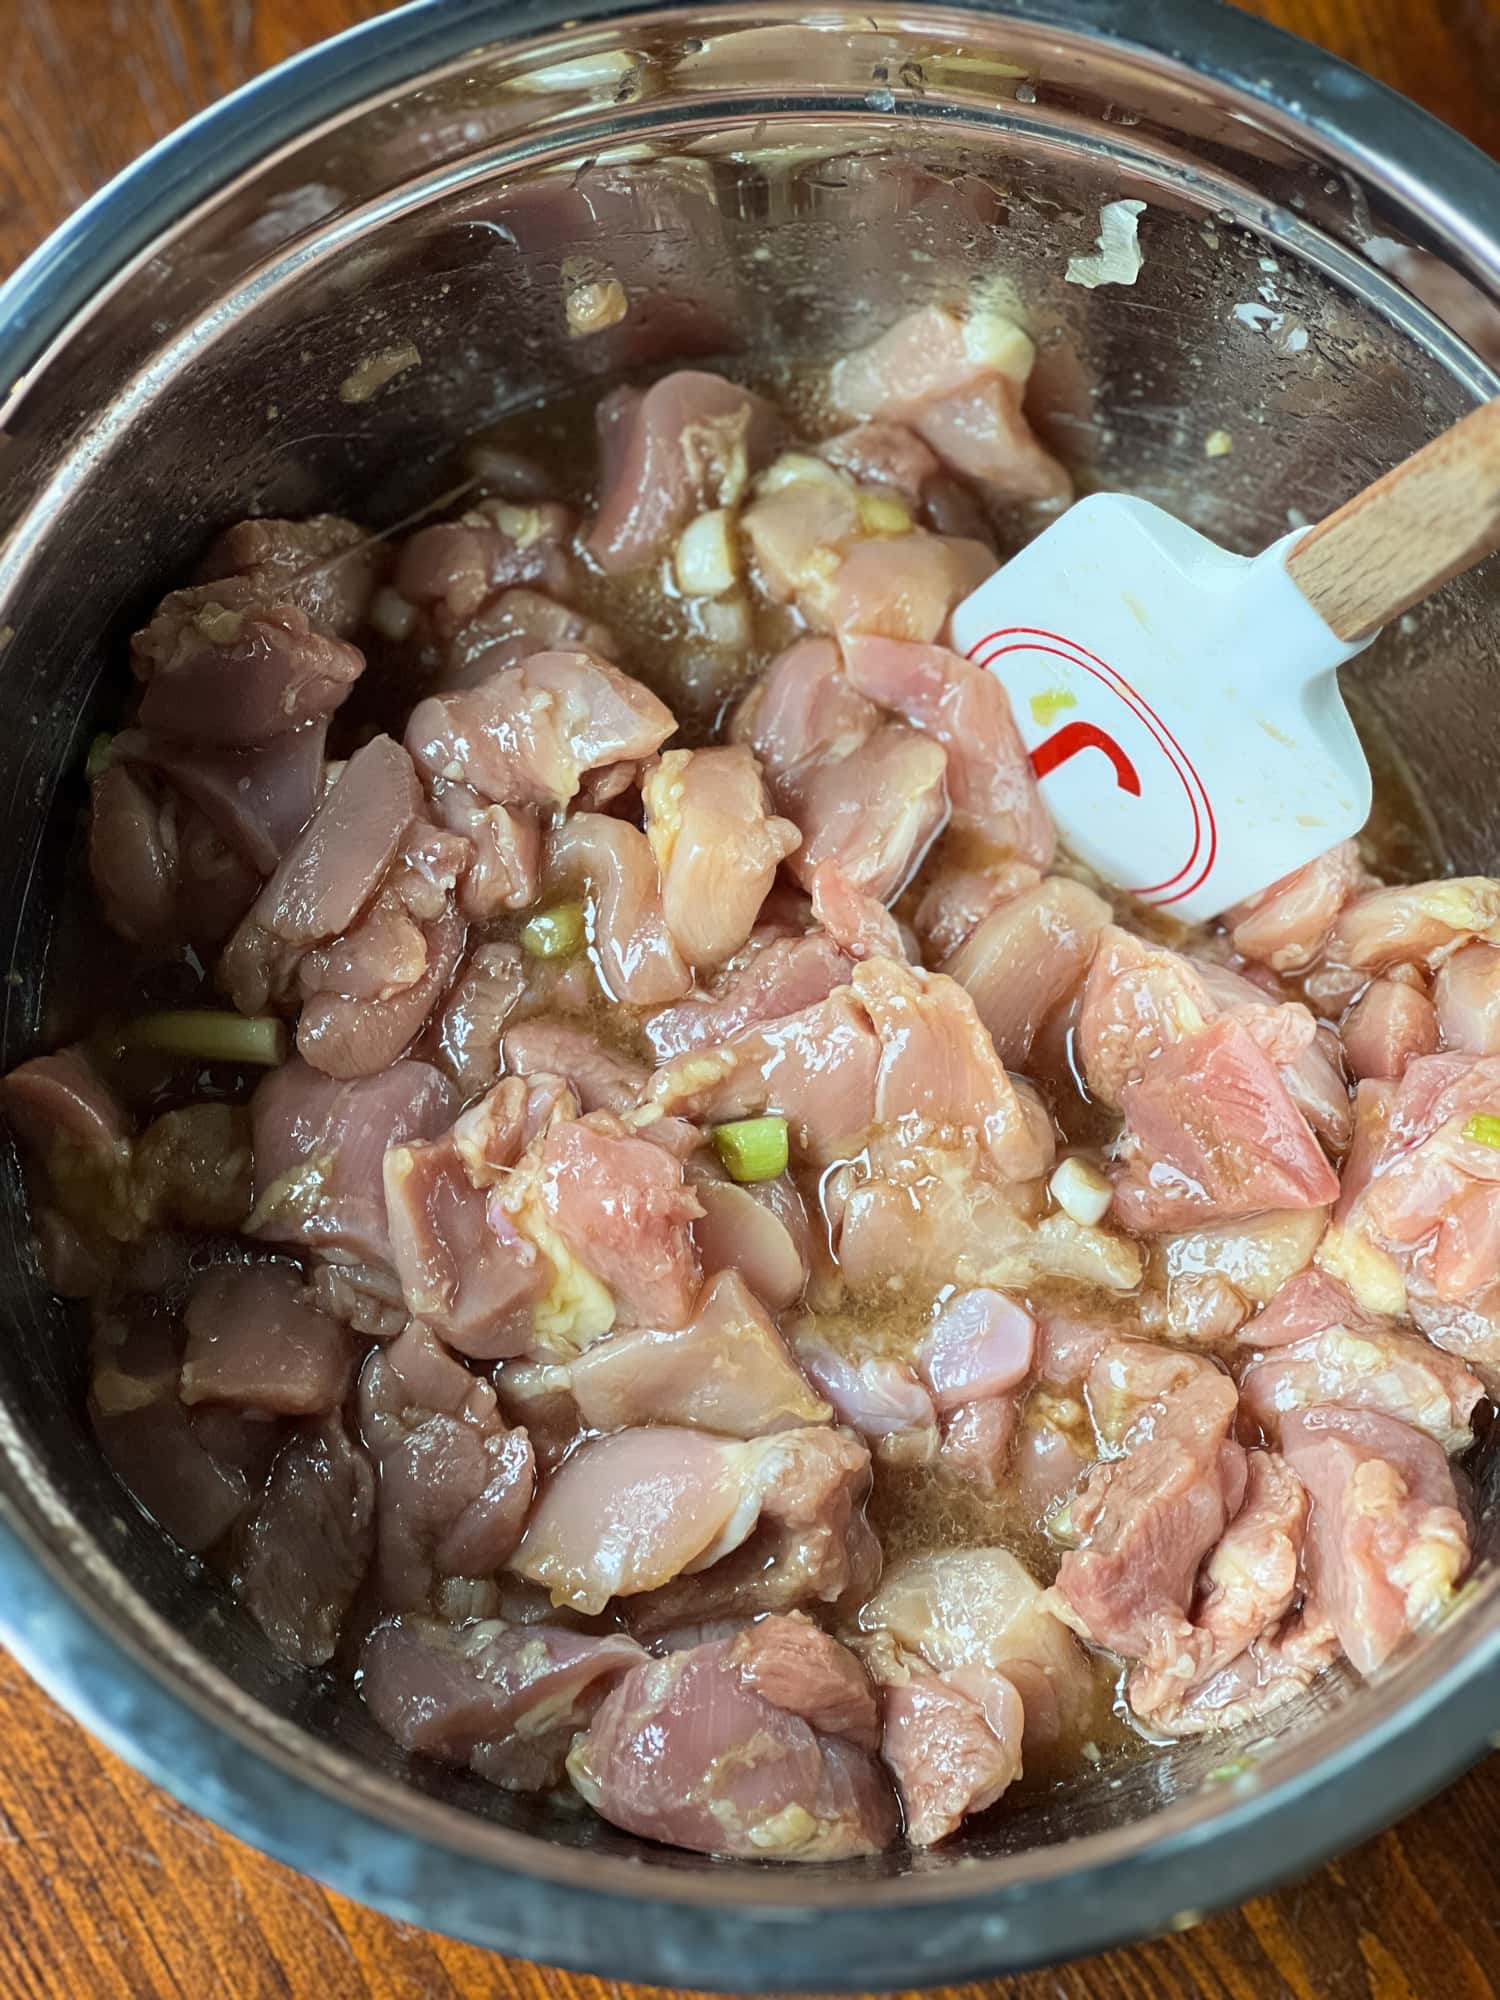 Uncooked chicken thigh pieces are mixed in a bowl of ginger and soy marinade.